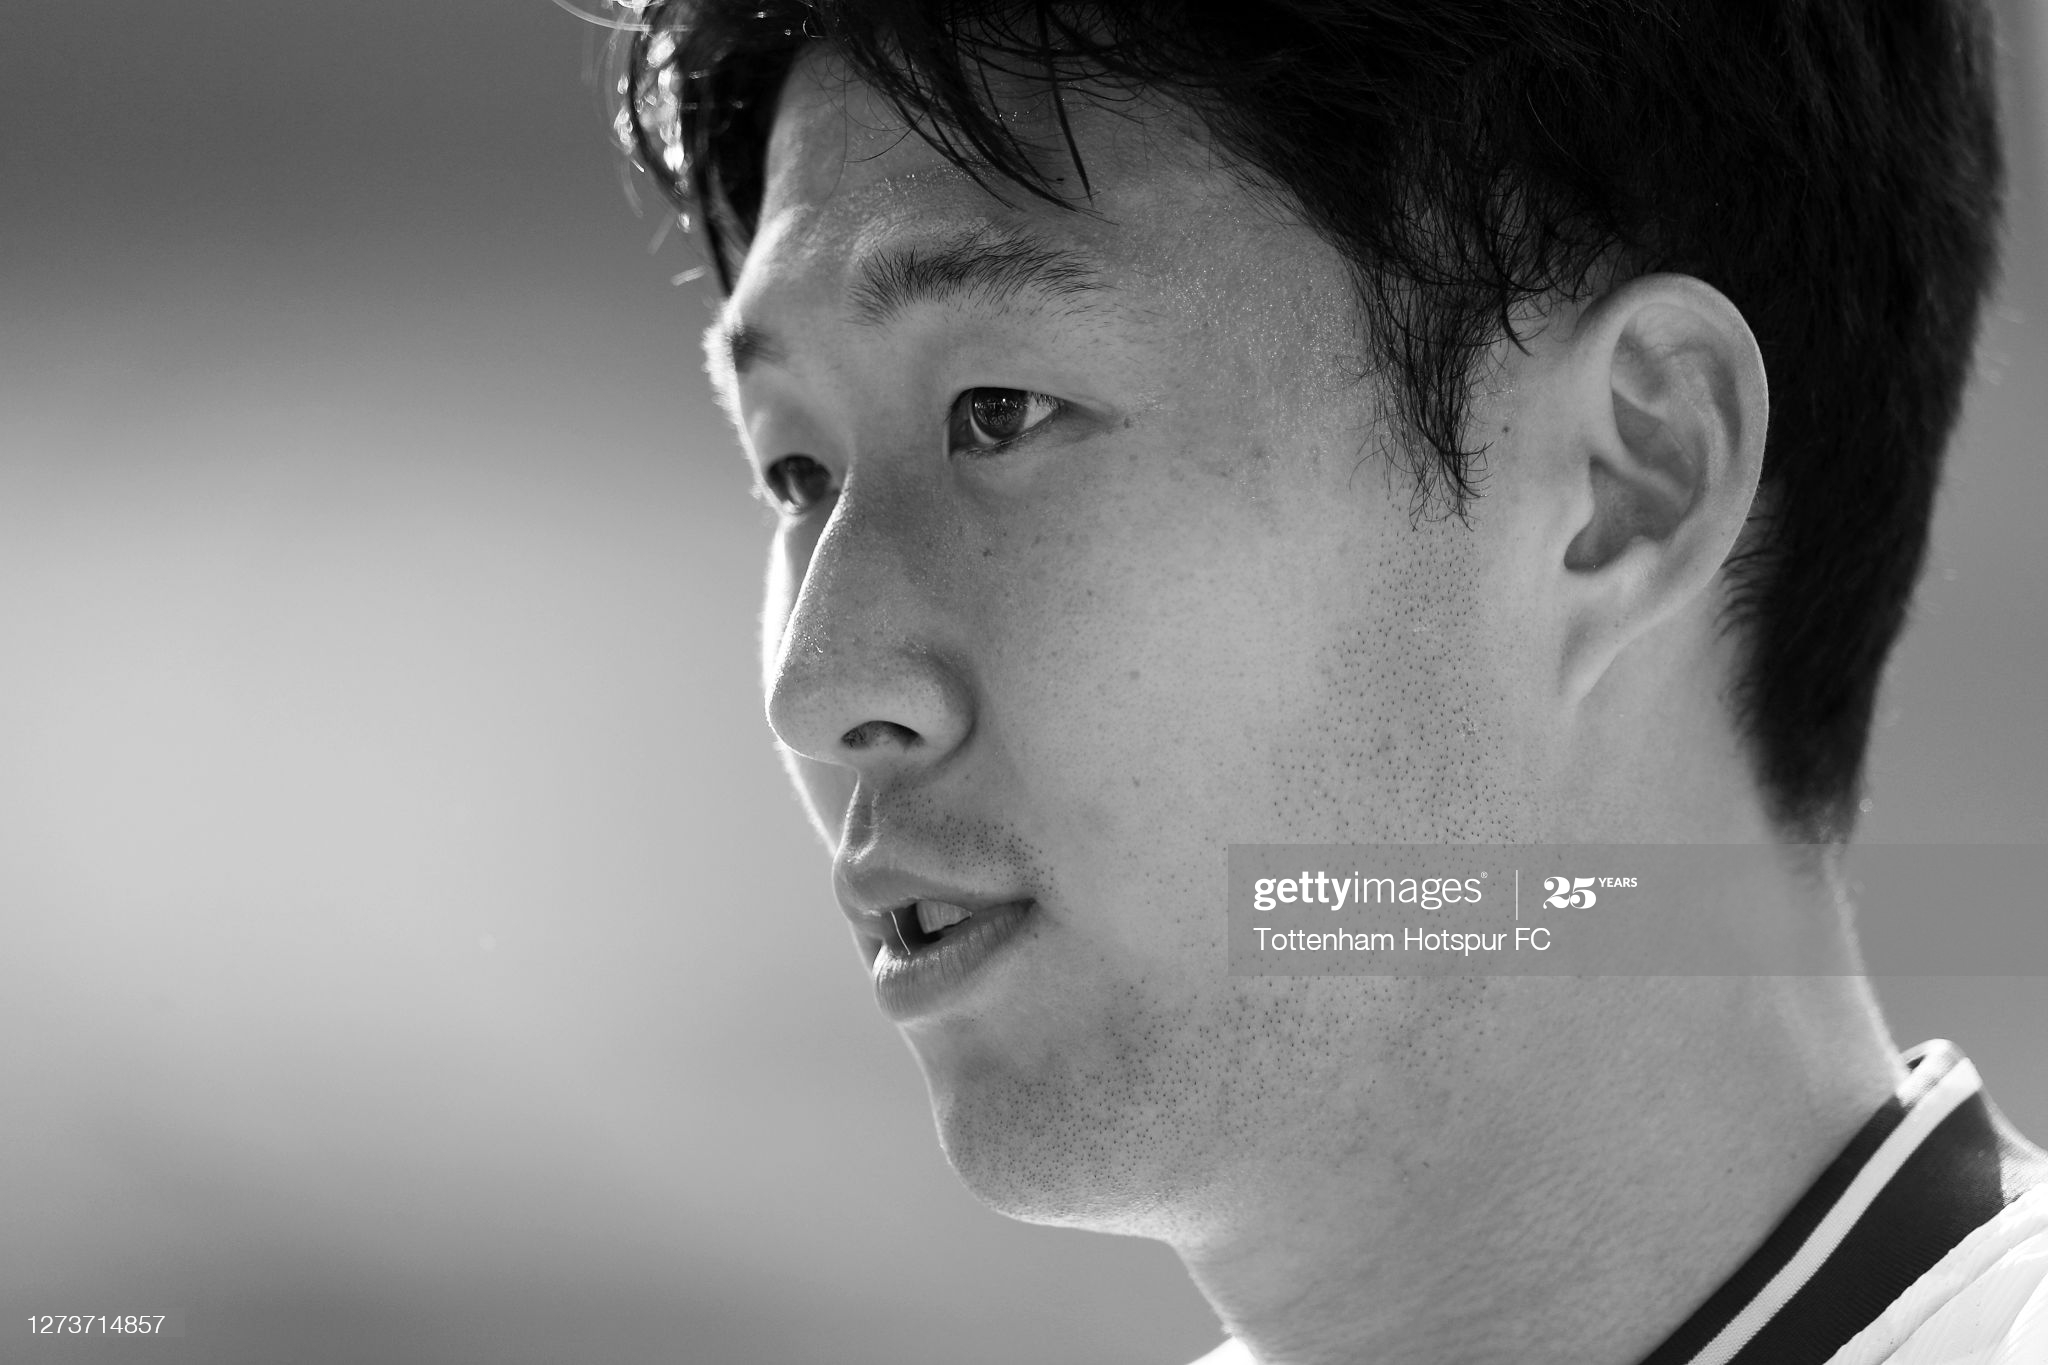 gettyimages-1273714857-2048x2048.jpg